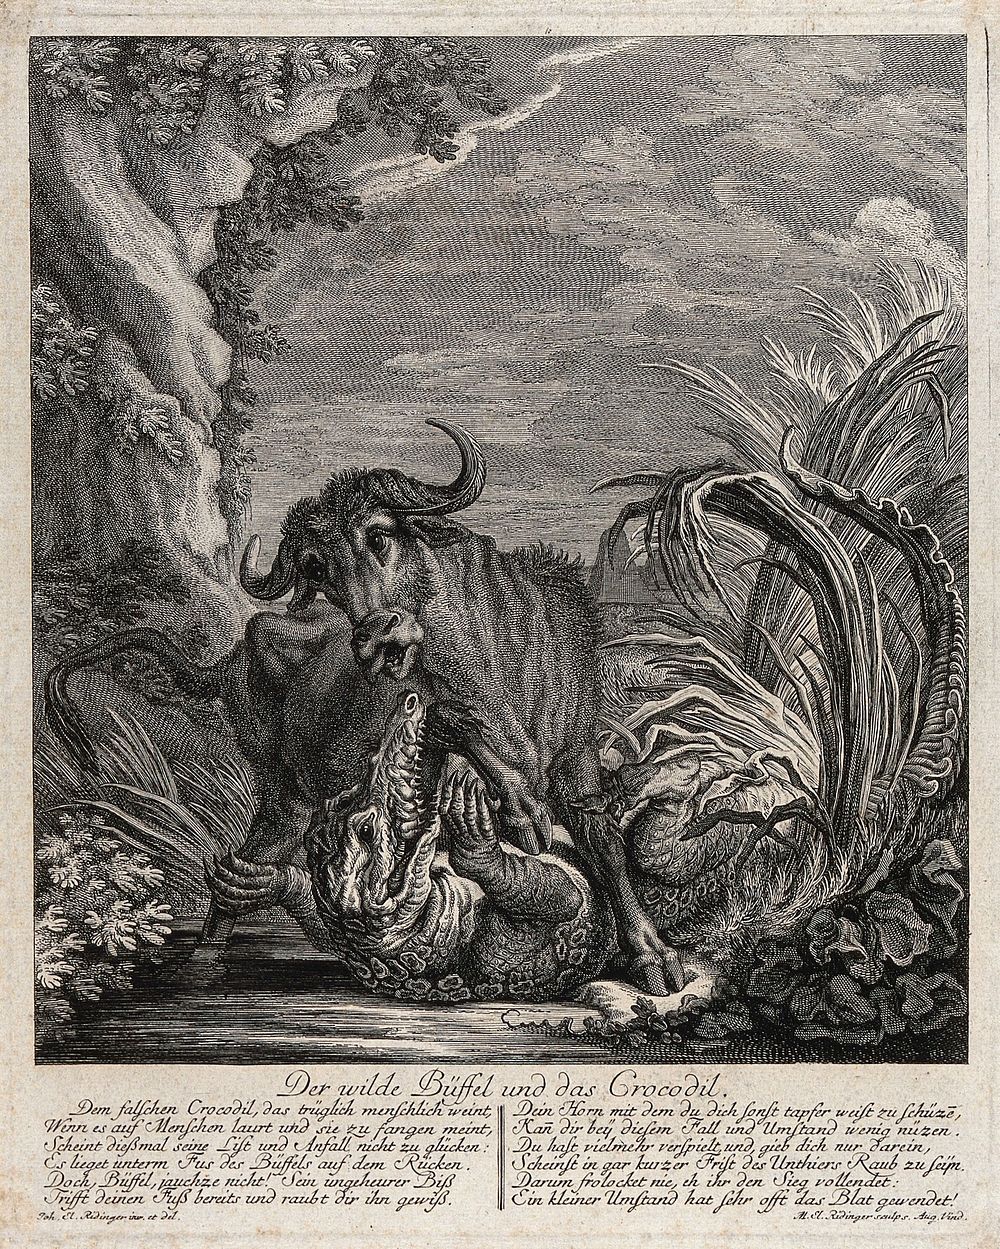 A crocodile fighting with a buffalo in shallow water. Etching by M.E. Ridinger after J.E. Ridinger.